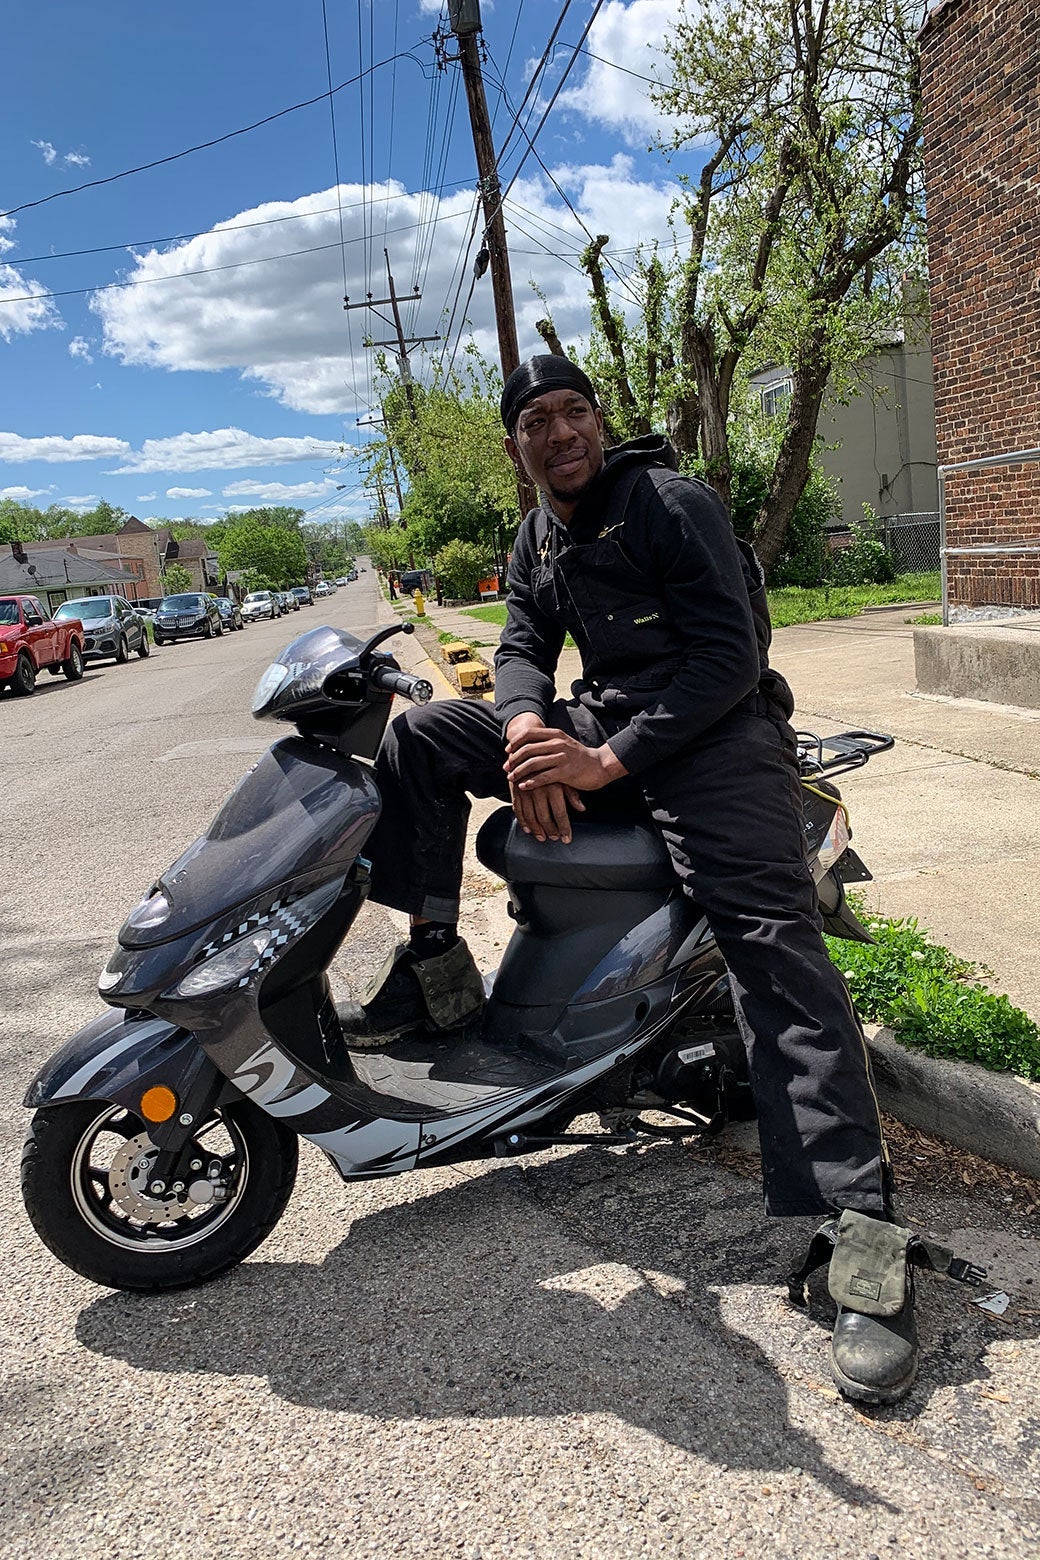 A Black man in a black do-rag, a black sweatshirt, and black overalls sits on a motorized scooter on the side of a street.